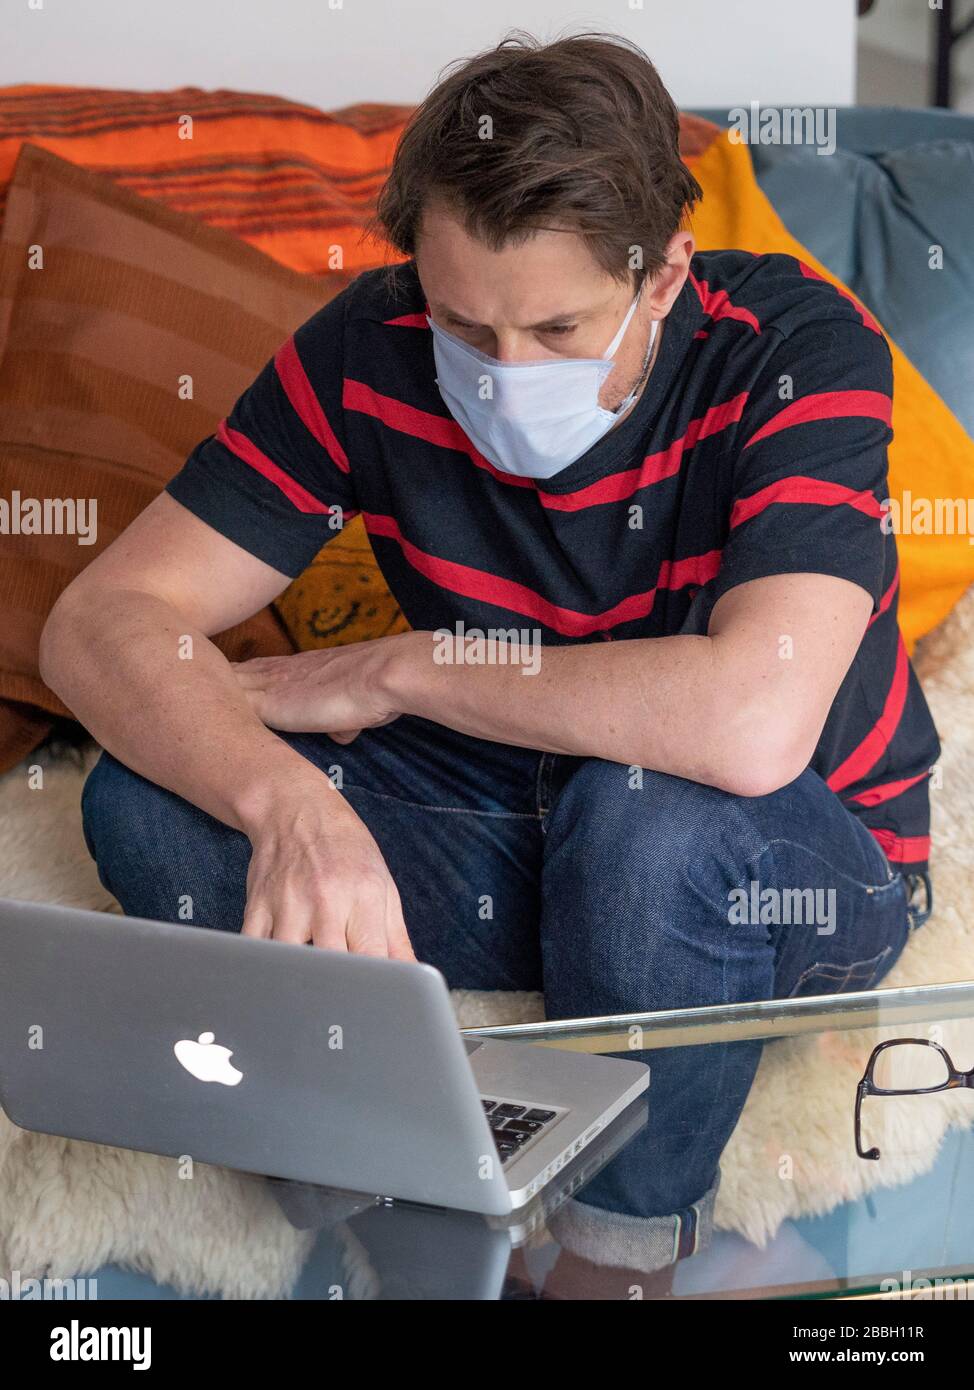 Mid 40's male working from home with Apple laptop, wearing face mask. Stock Photo